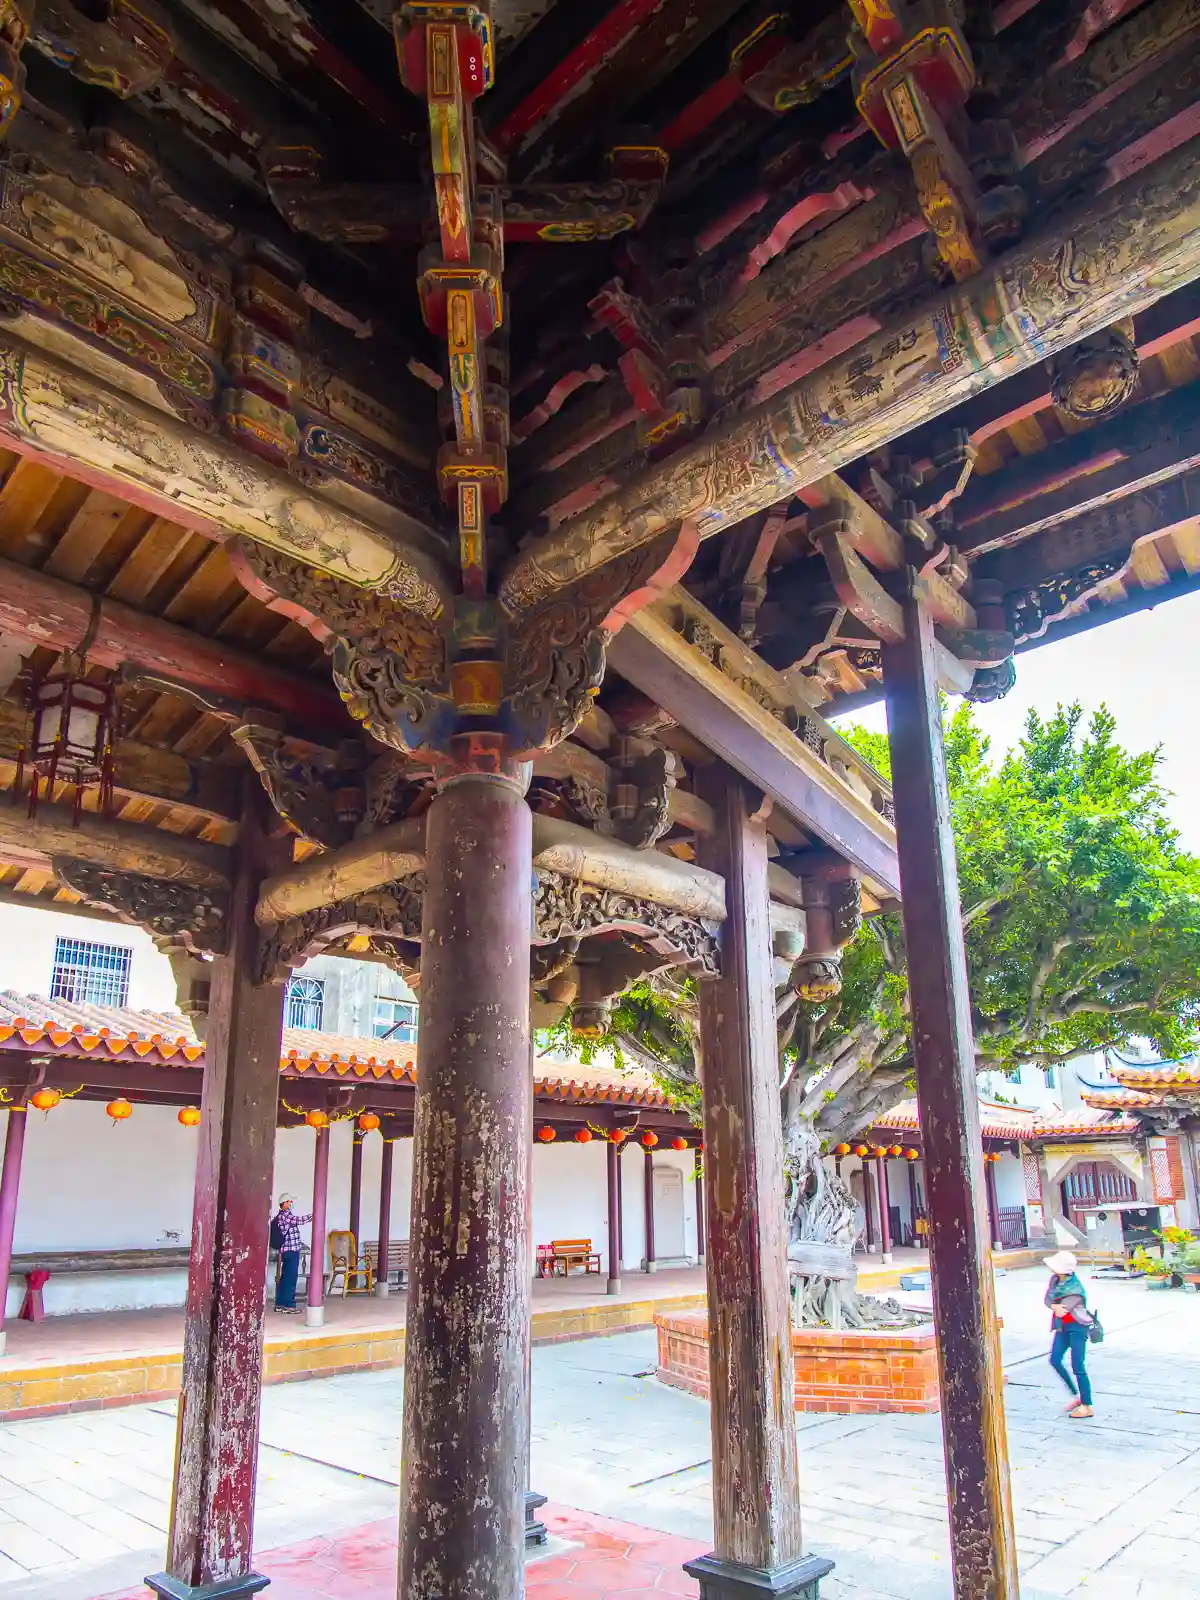 Aged paint is visible on the massive wooden columns supporting the temple's Theatre Pavilion.